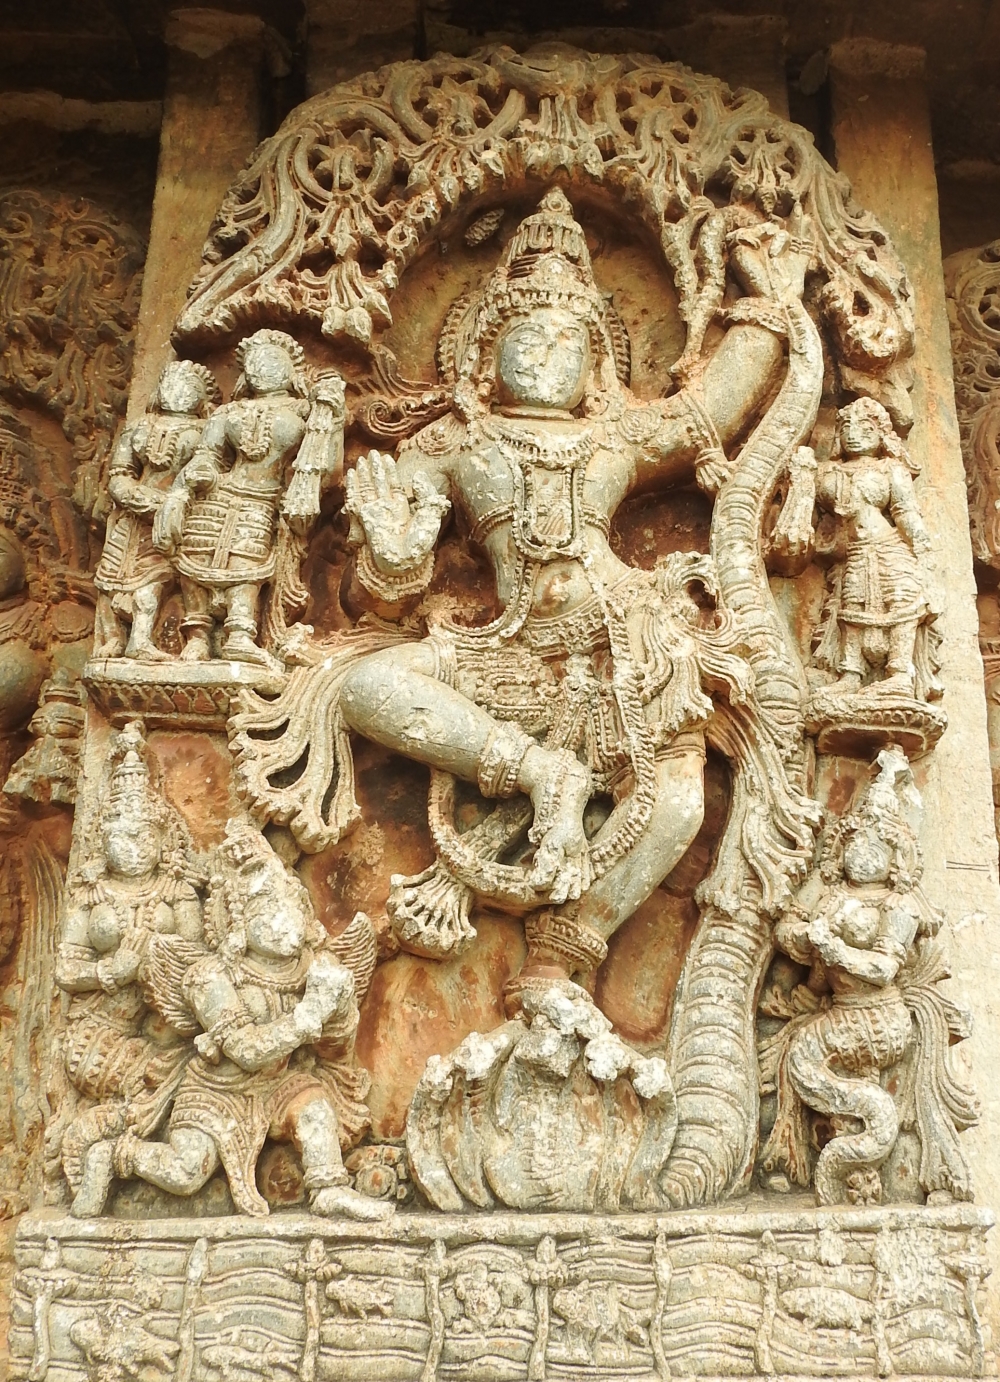 Fig. 14: The Kaliyamardana episode from Krishna’s life displayed on the jangha. He is shown dancing on the head of the five-hooded Kaliya while Kaliya’s wives and Garuda are seen in anjalimudra. The Yamuna river, where this episode takes place is carved as well with minute detailing such as waves from river, fishes and turtles inside the river, and half immersed figure of Kaliya from the river